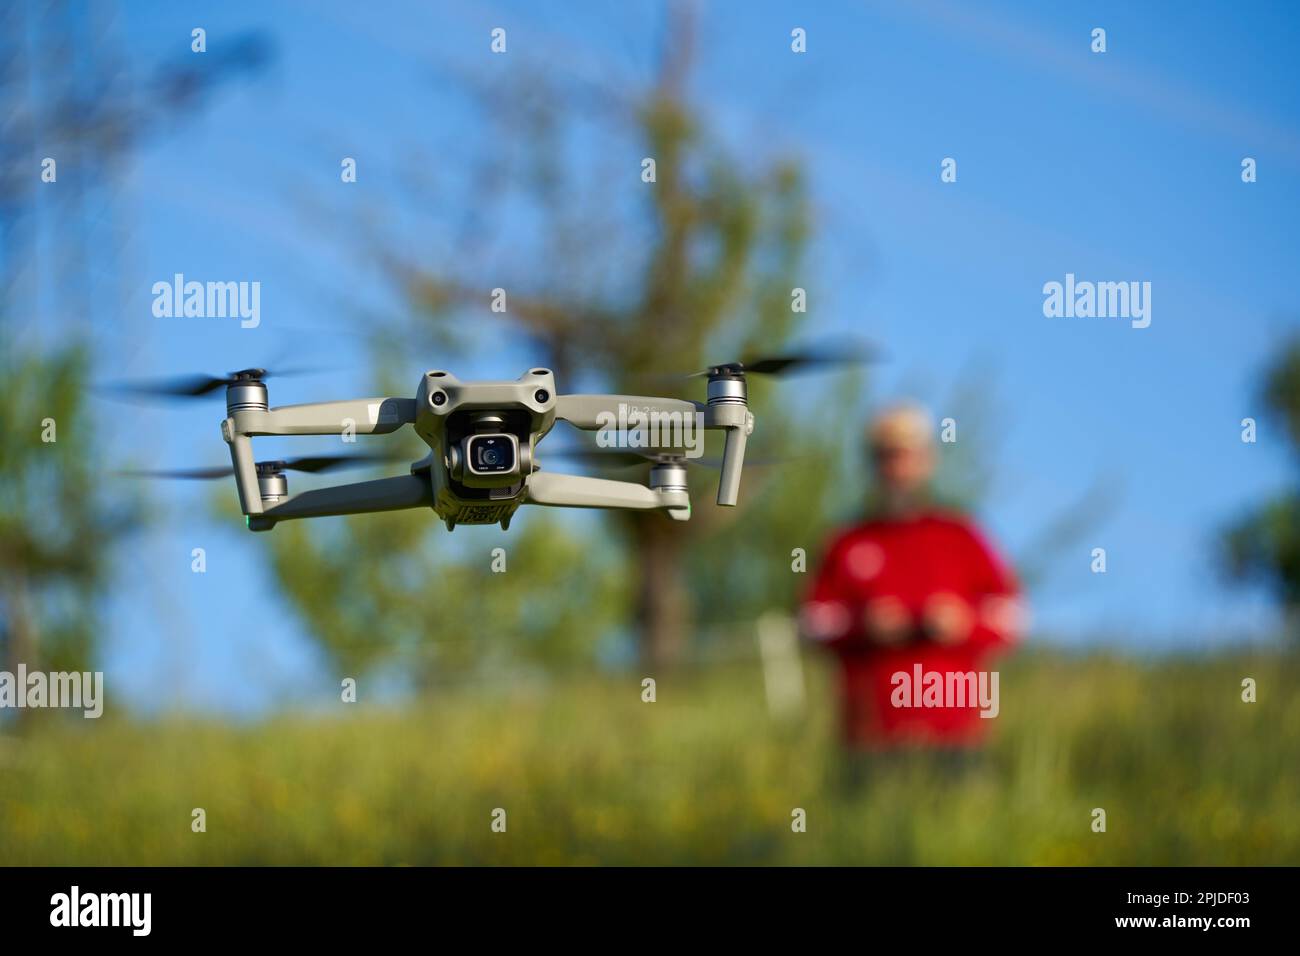 Nürtingen, Germany - May 29, 2021: Drone dji air 2s. The gray multicopter is the all in one solution for ambitious photographers and videographers. Fr Stock Photo